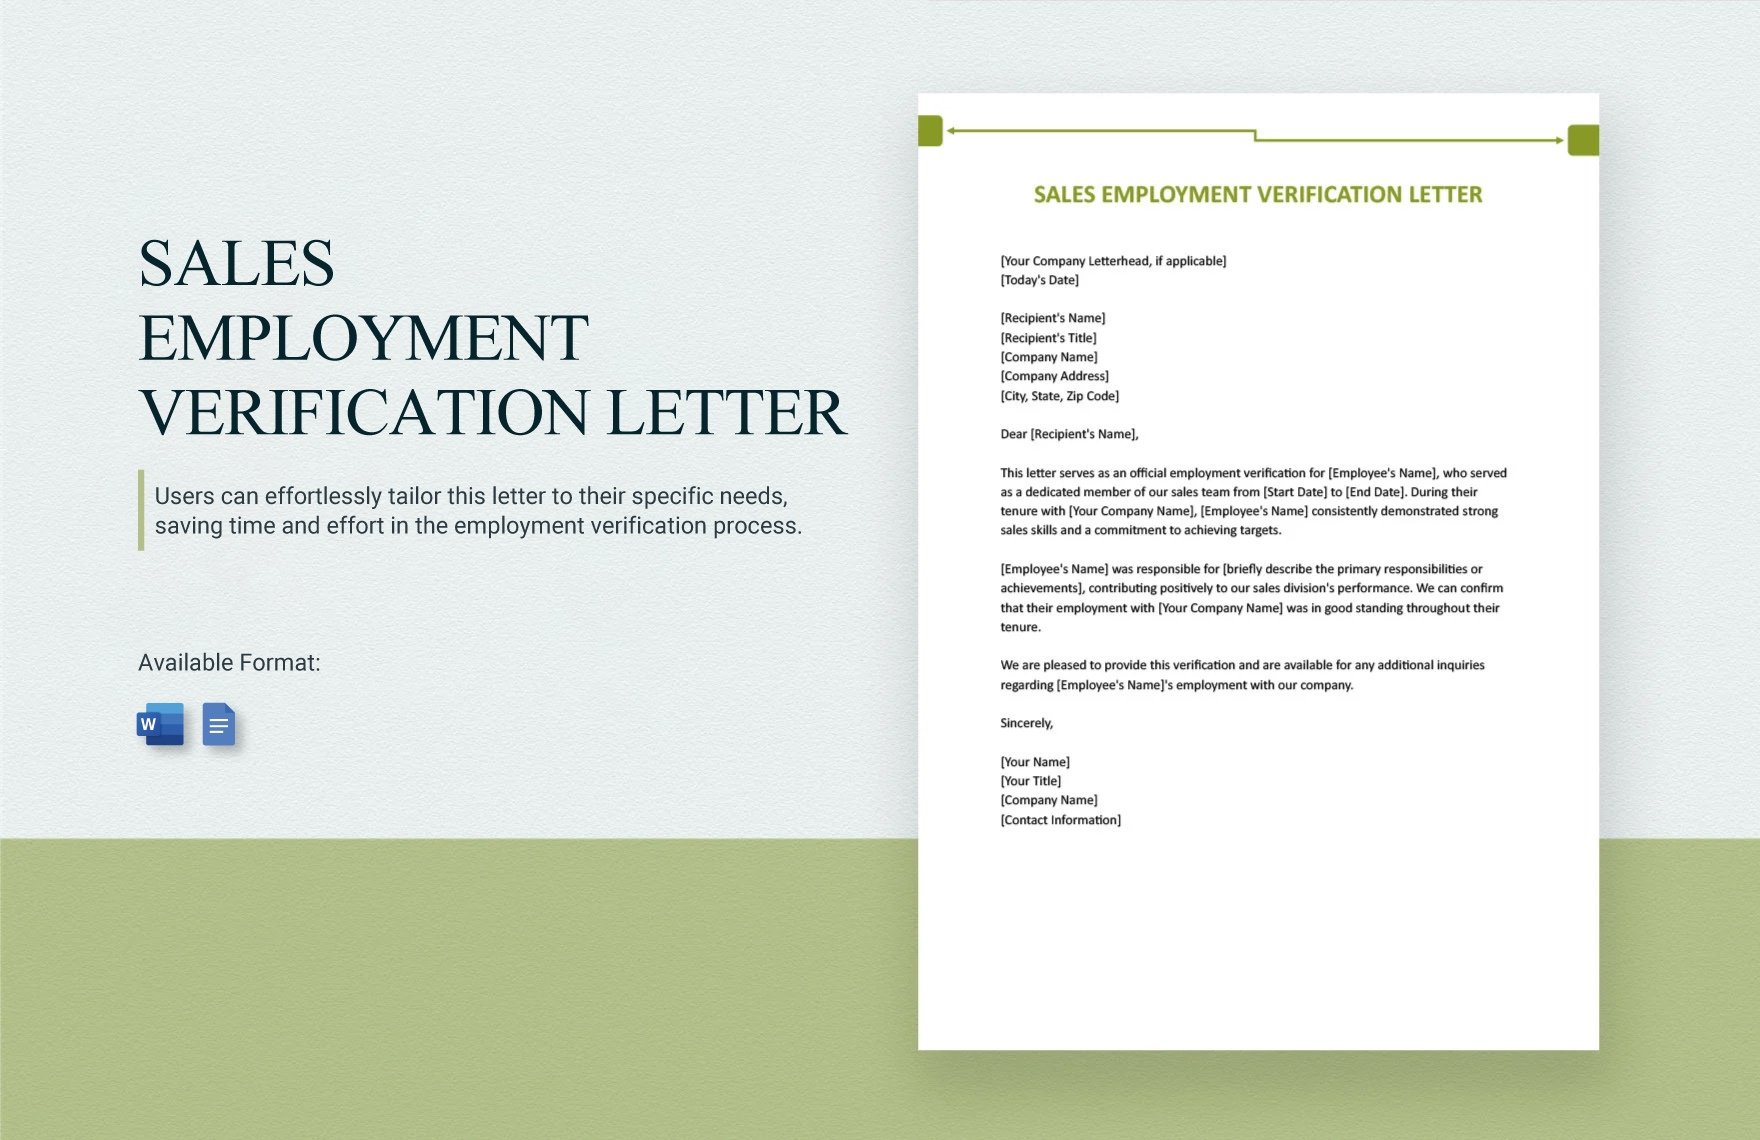 Free Sales Employment Verification Letter in Word, Google Docs